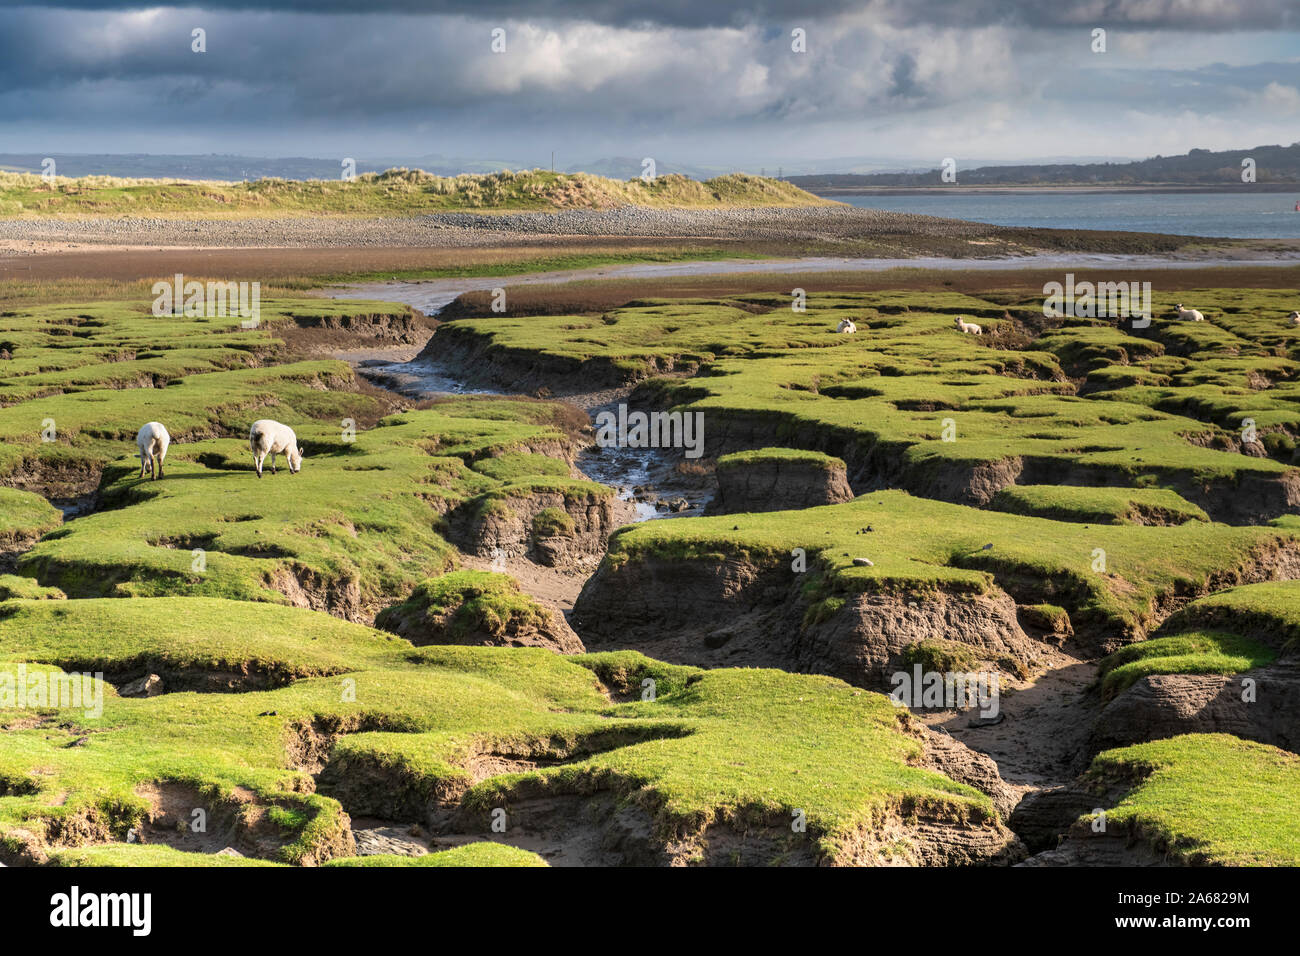 Sheep graze on 'The Skern', a north east facing horseshoe shaped bay situated on the northern side of Northam Burrows. Northam Burrows has SSSI status Stock Photo